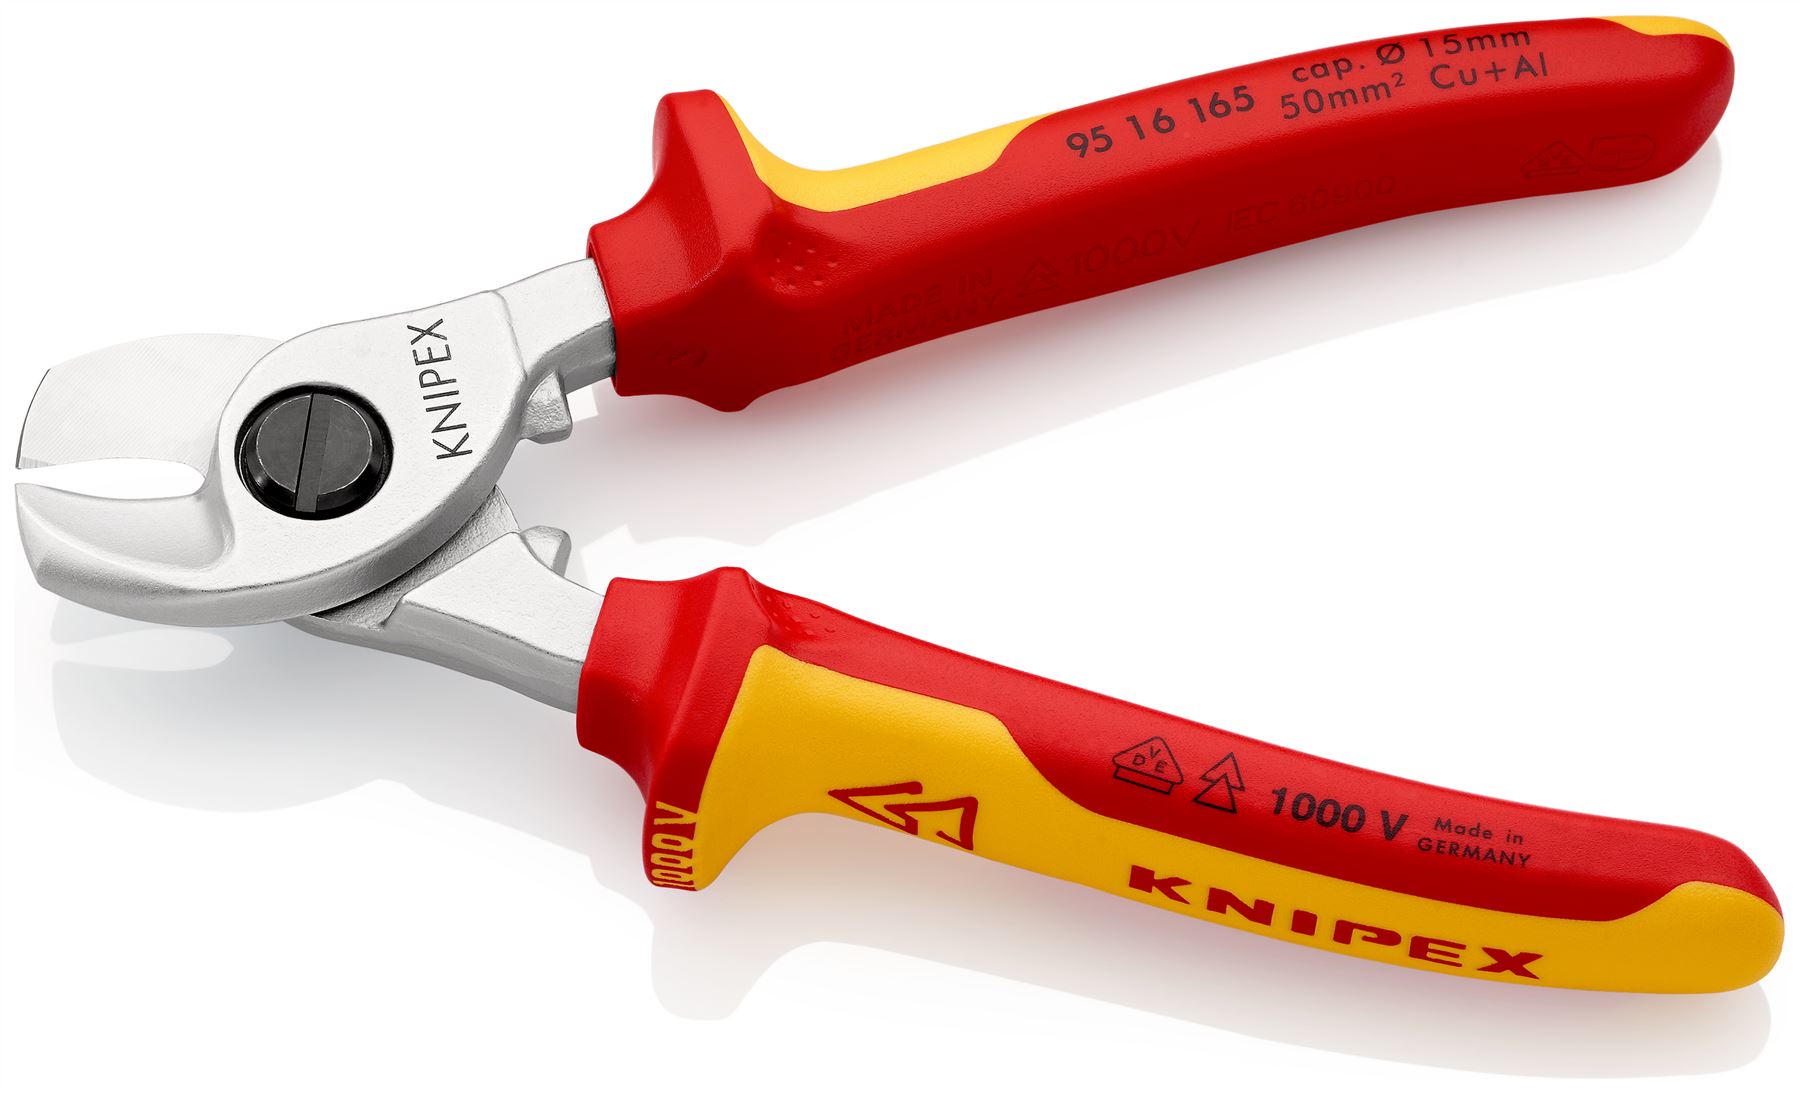 KNIPEX Cable Shears Cutting Pliers Cuts Cable up to 15mm Diameter 165mm VDE Insulated Multi Component Grips 95 16 165